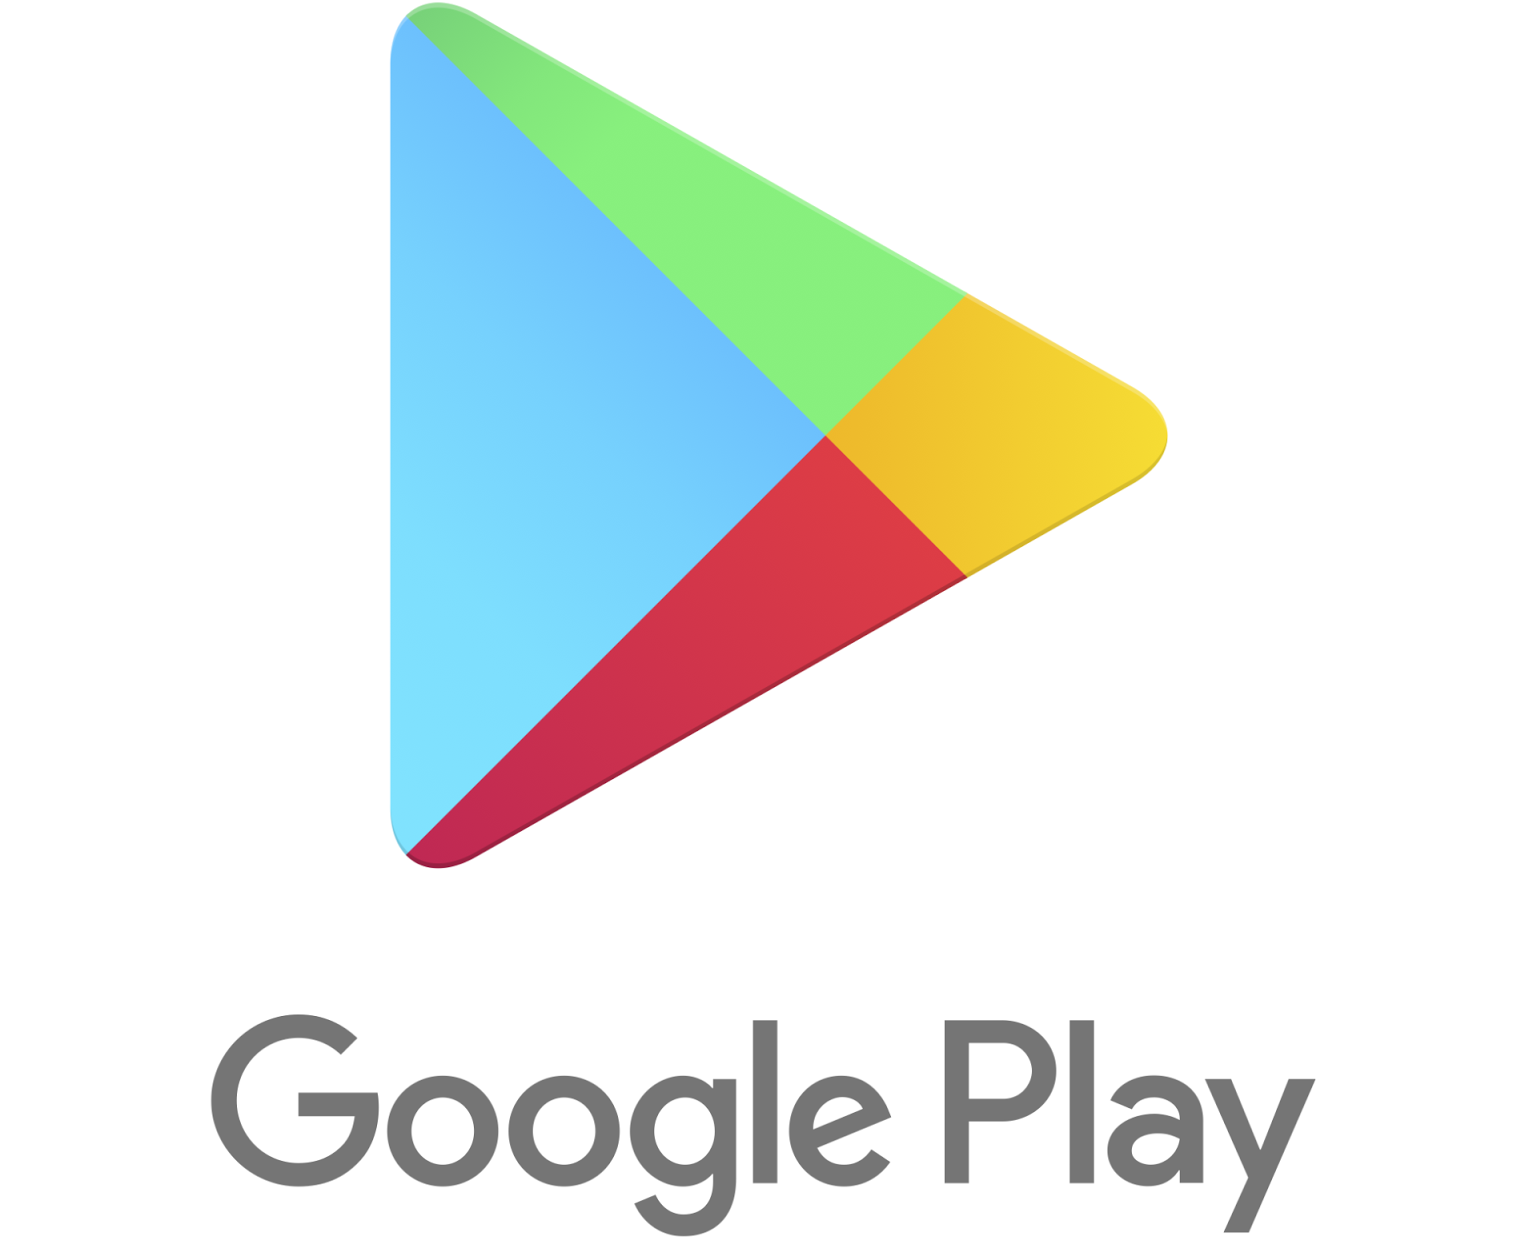 google_play_logo_text_and_graphic_2016.png